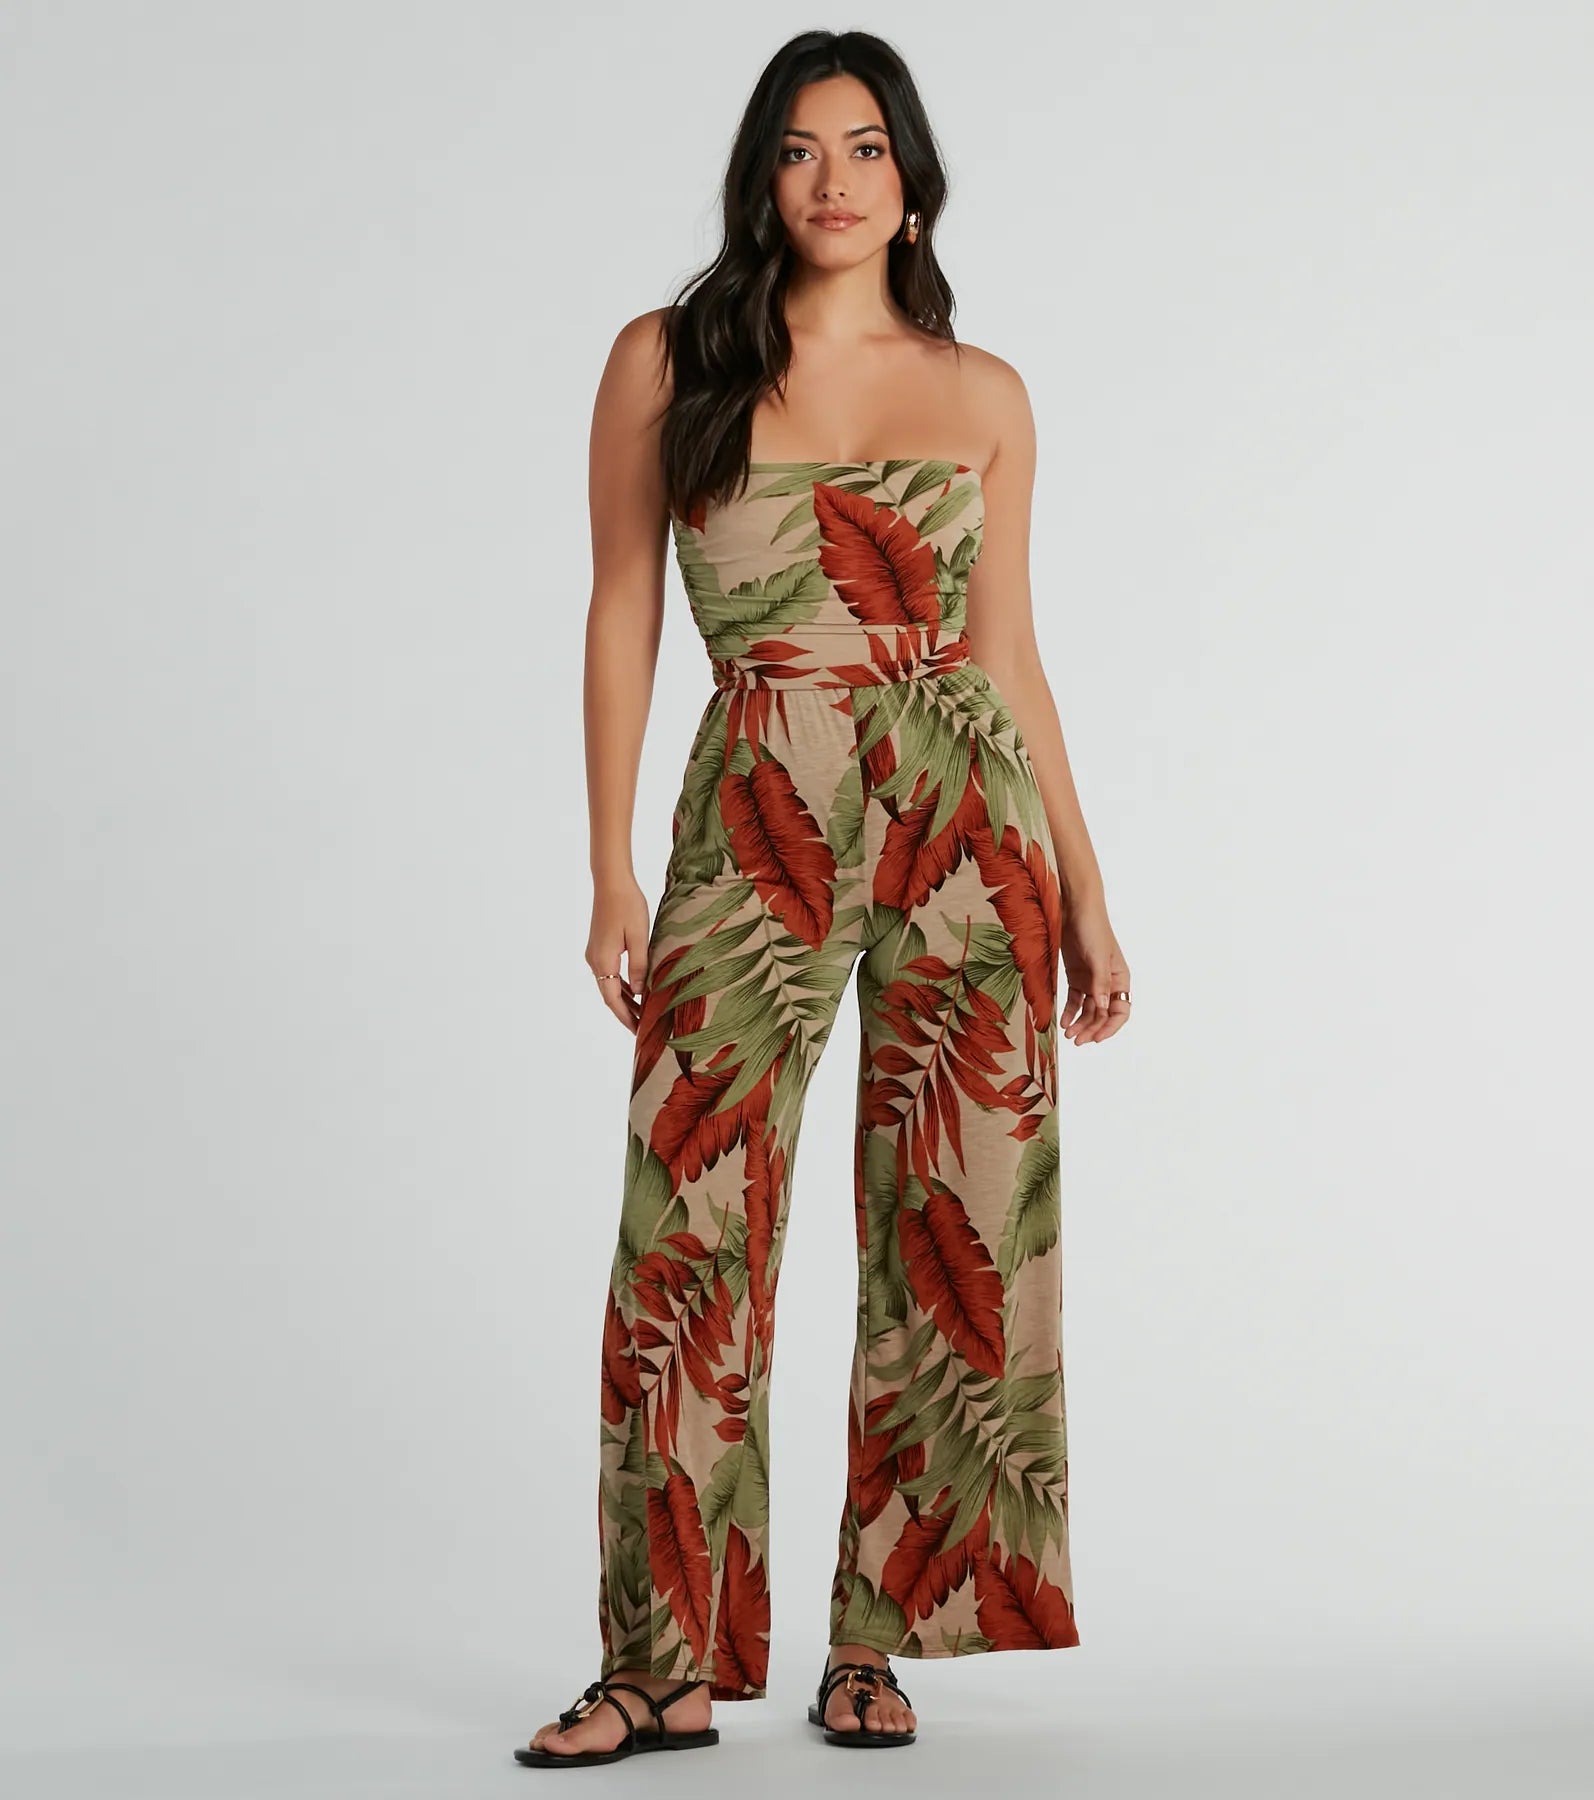 Strapless Tropical Print Stretchy Fitted Straight Neck Knit Beach Dress/Jumpsuit